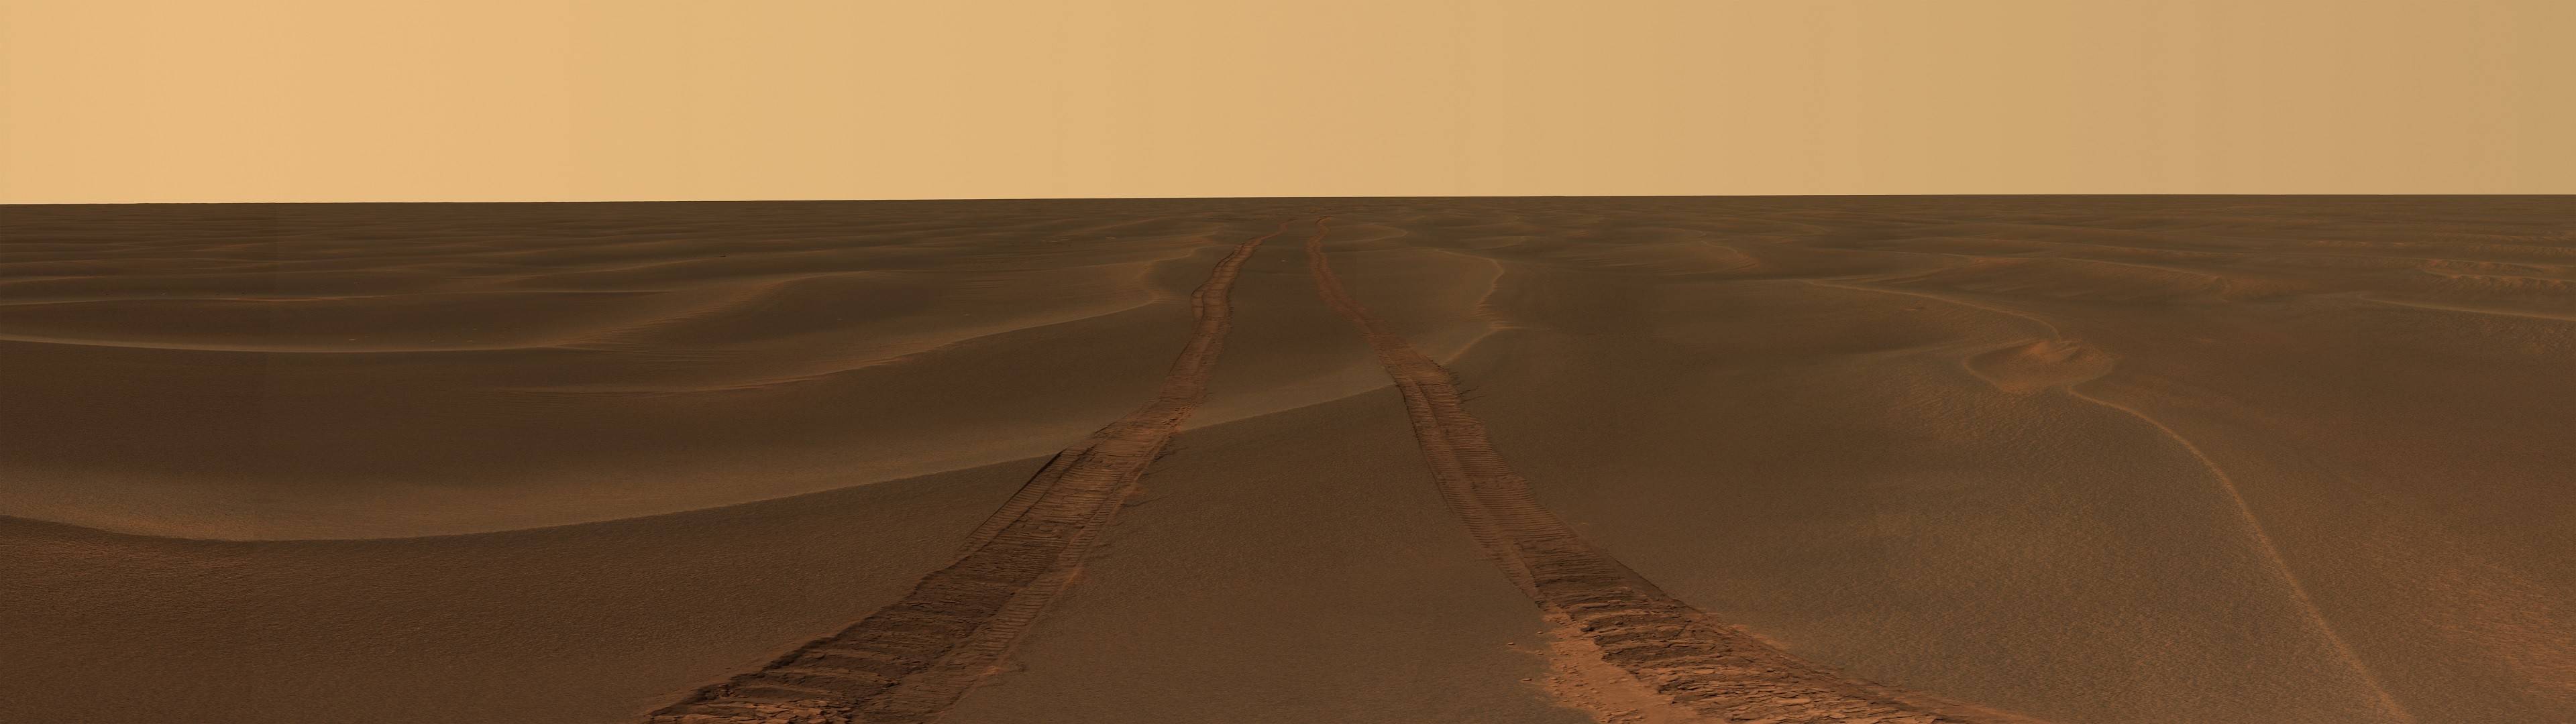 3840x1080 The-Opportunity-Rover-looking-back-at-its-tracks-